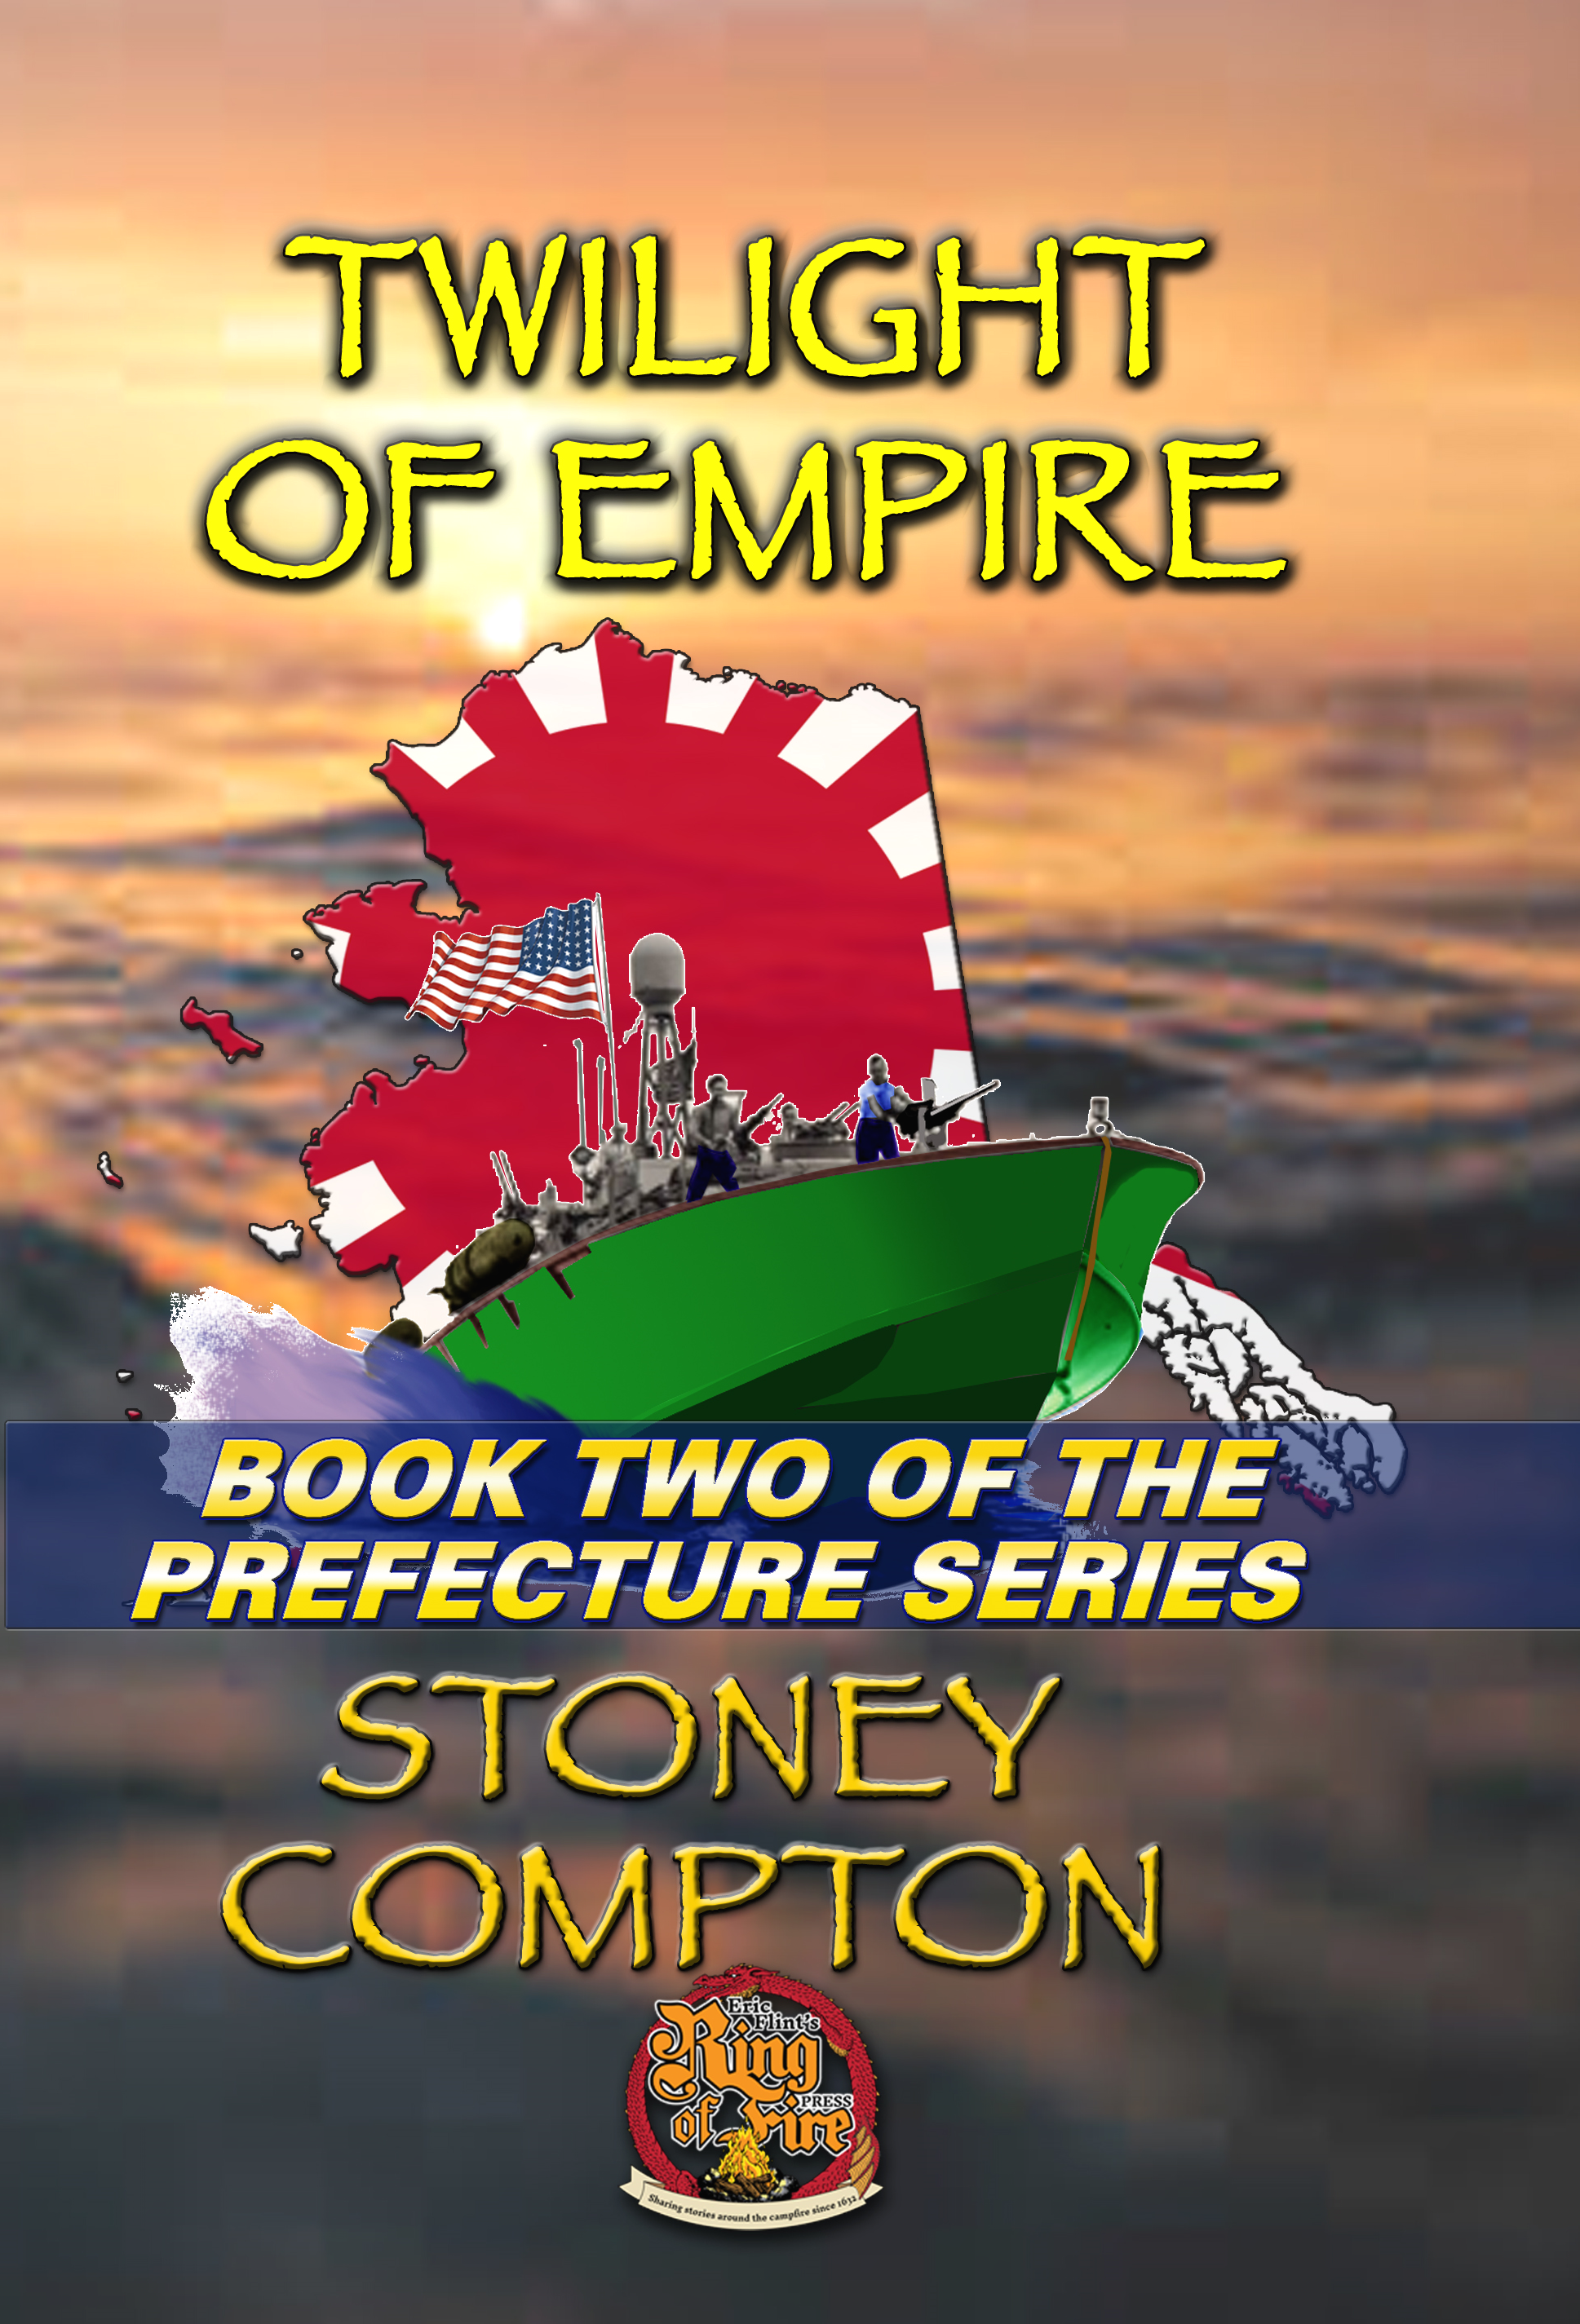 Cover art for Twilight of Empire by Stoney Compton